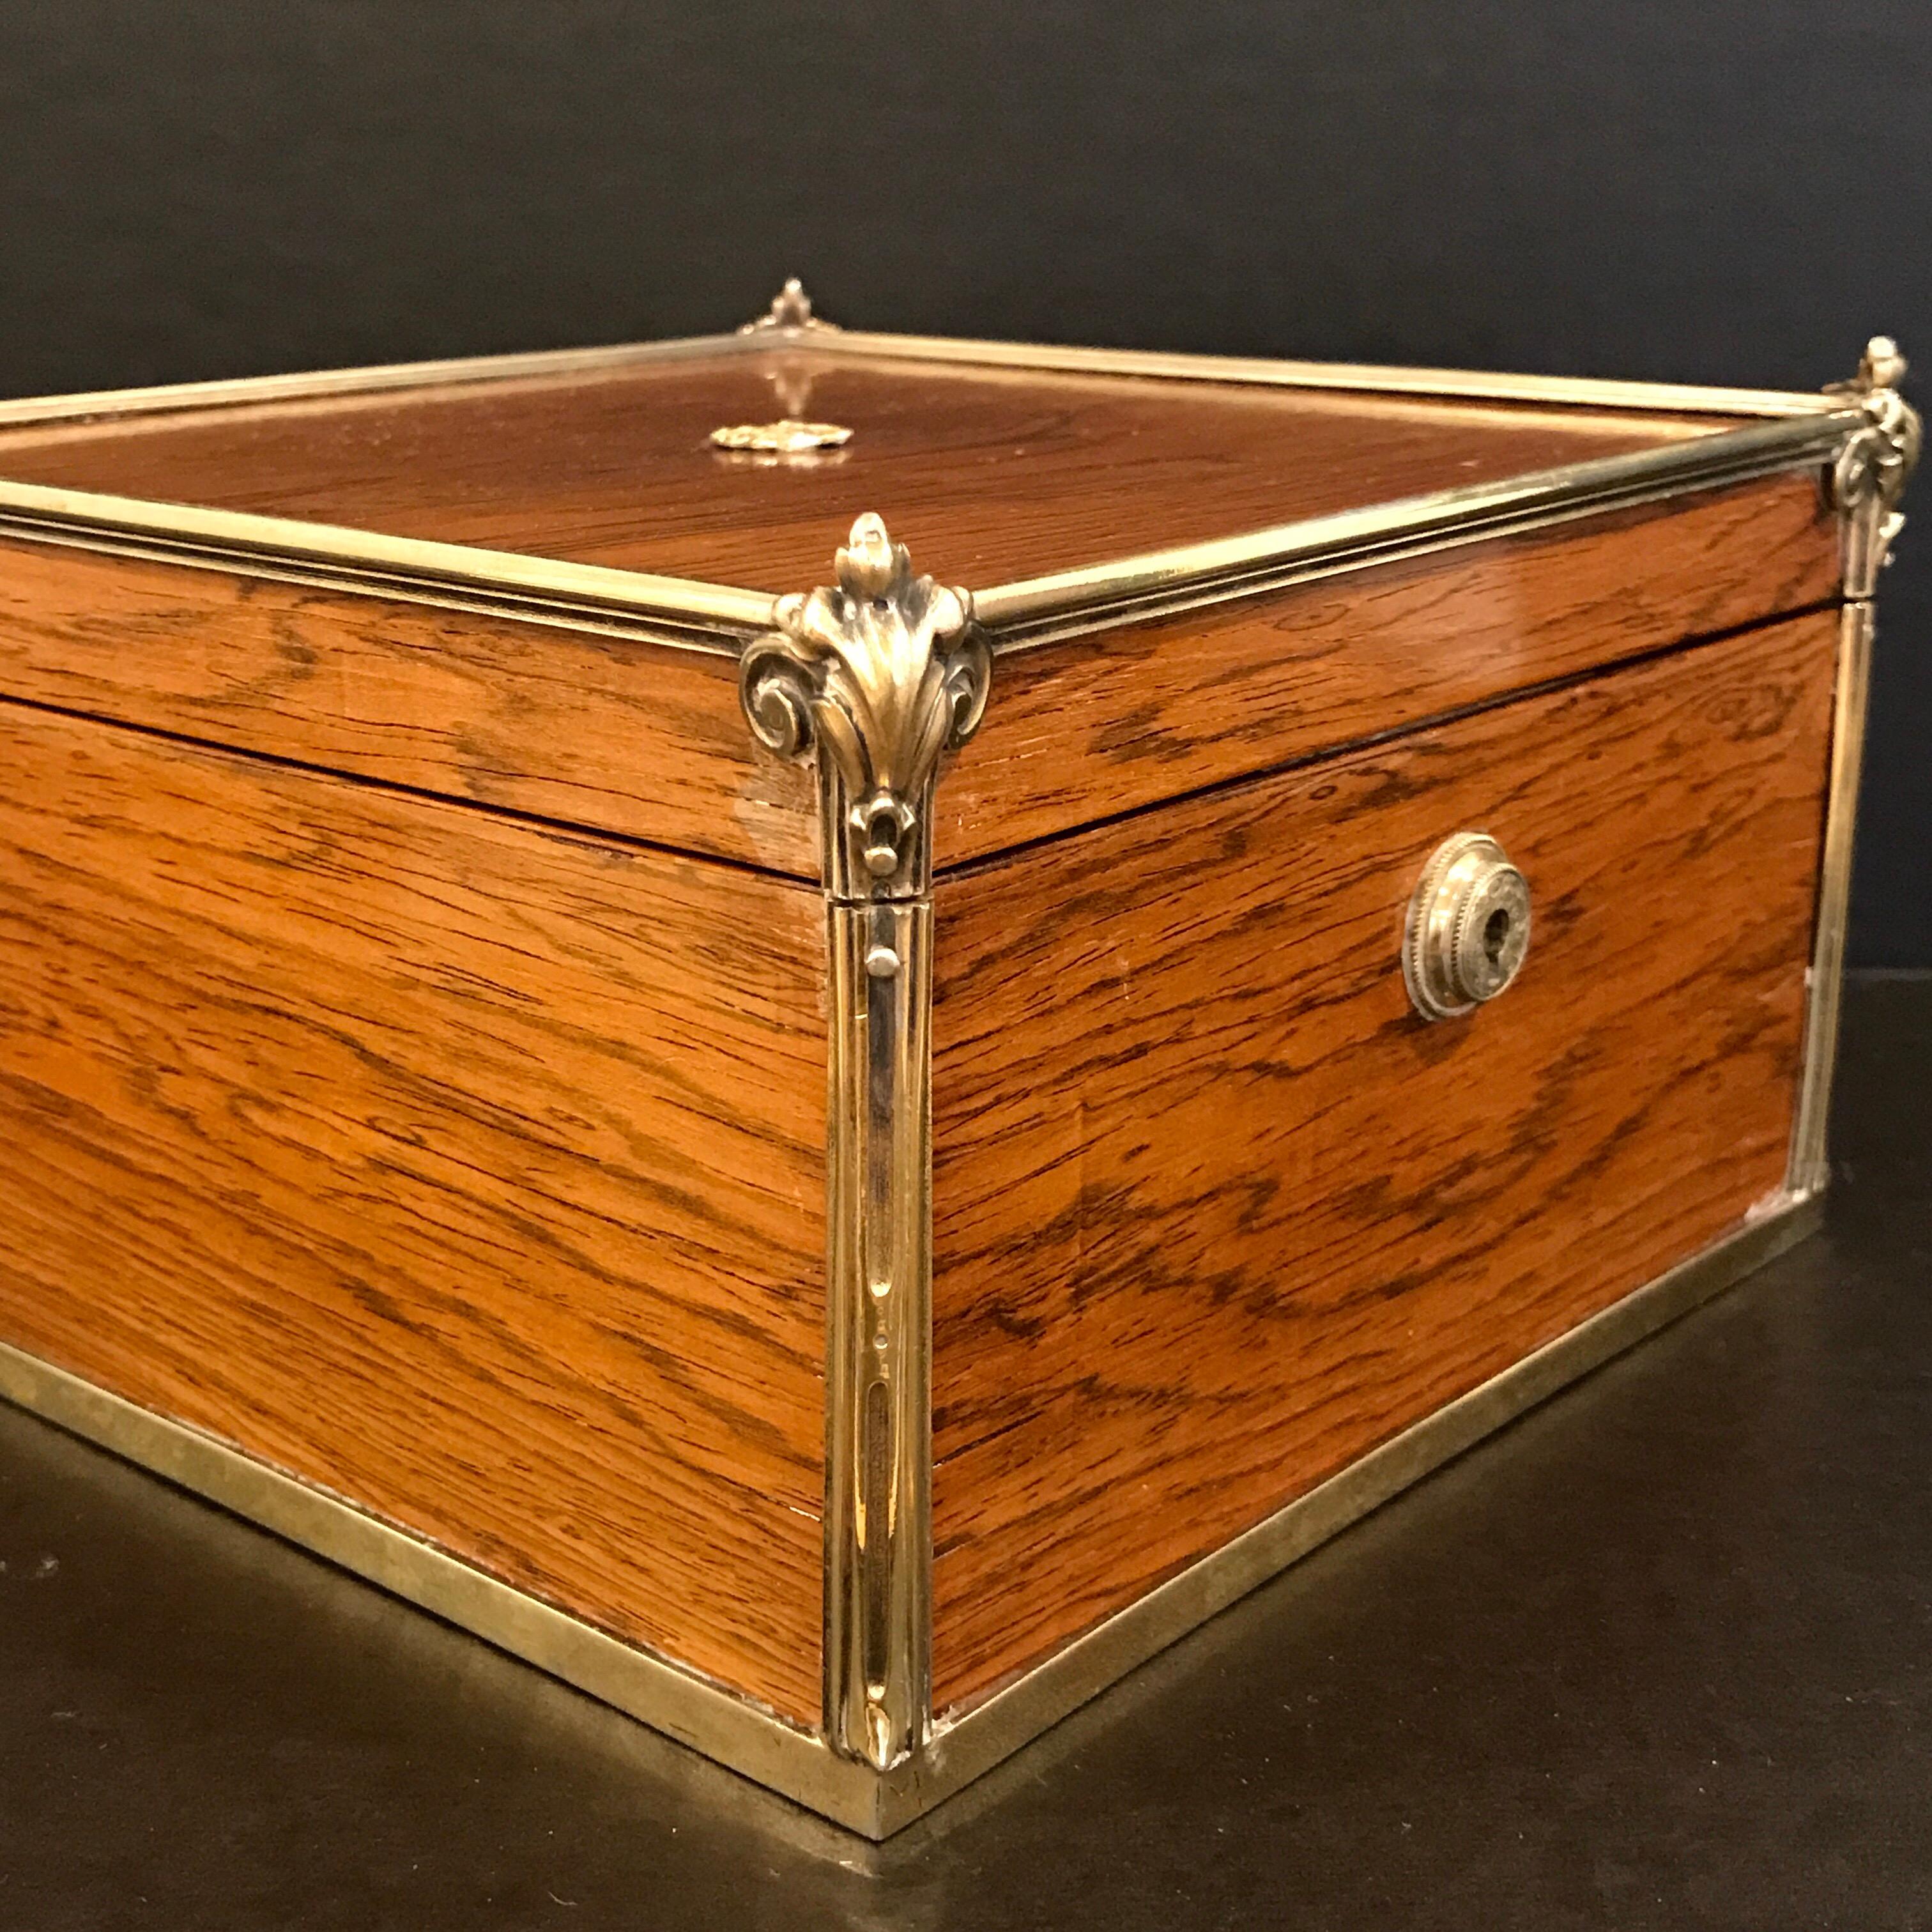 Early 19th Century Royal Silver-Gilt Mounted Toilet Box by Paul Storr, London, 1813 For Sale